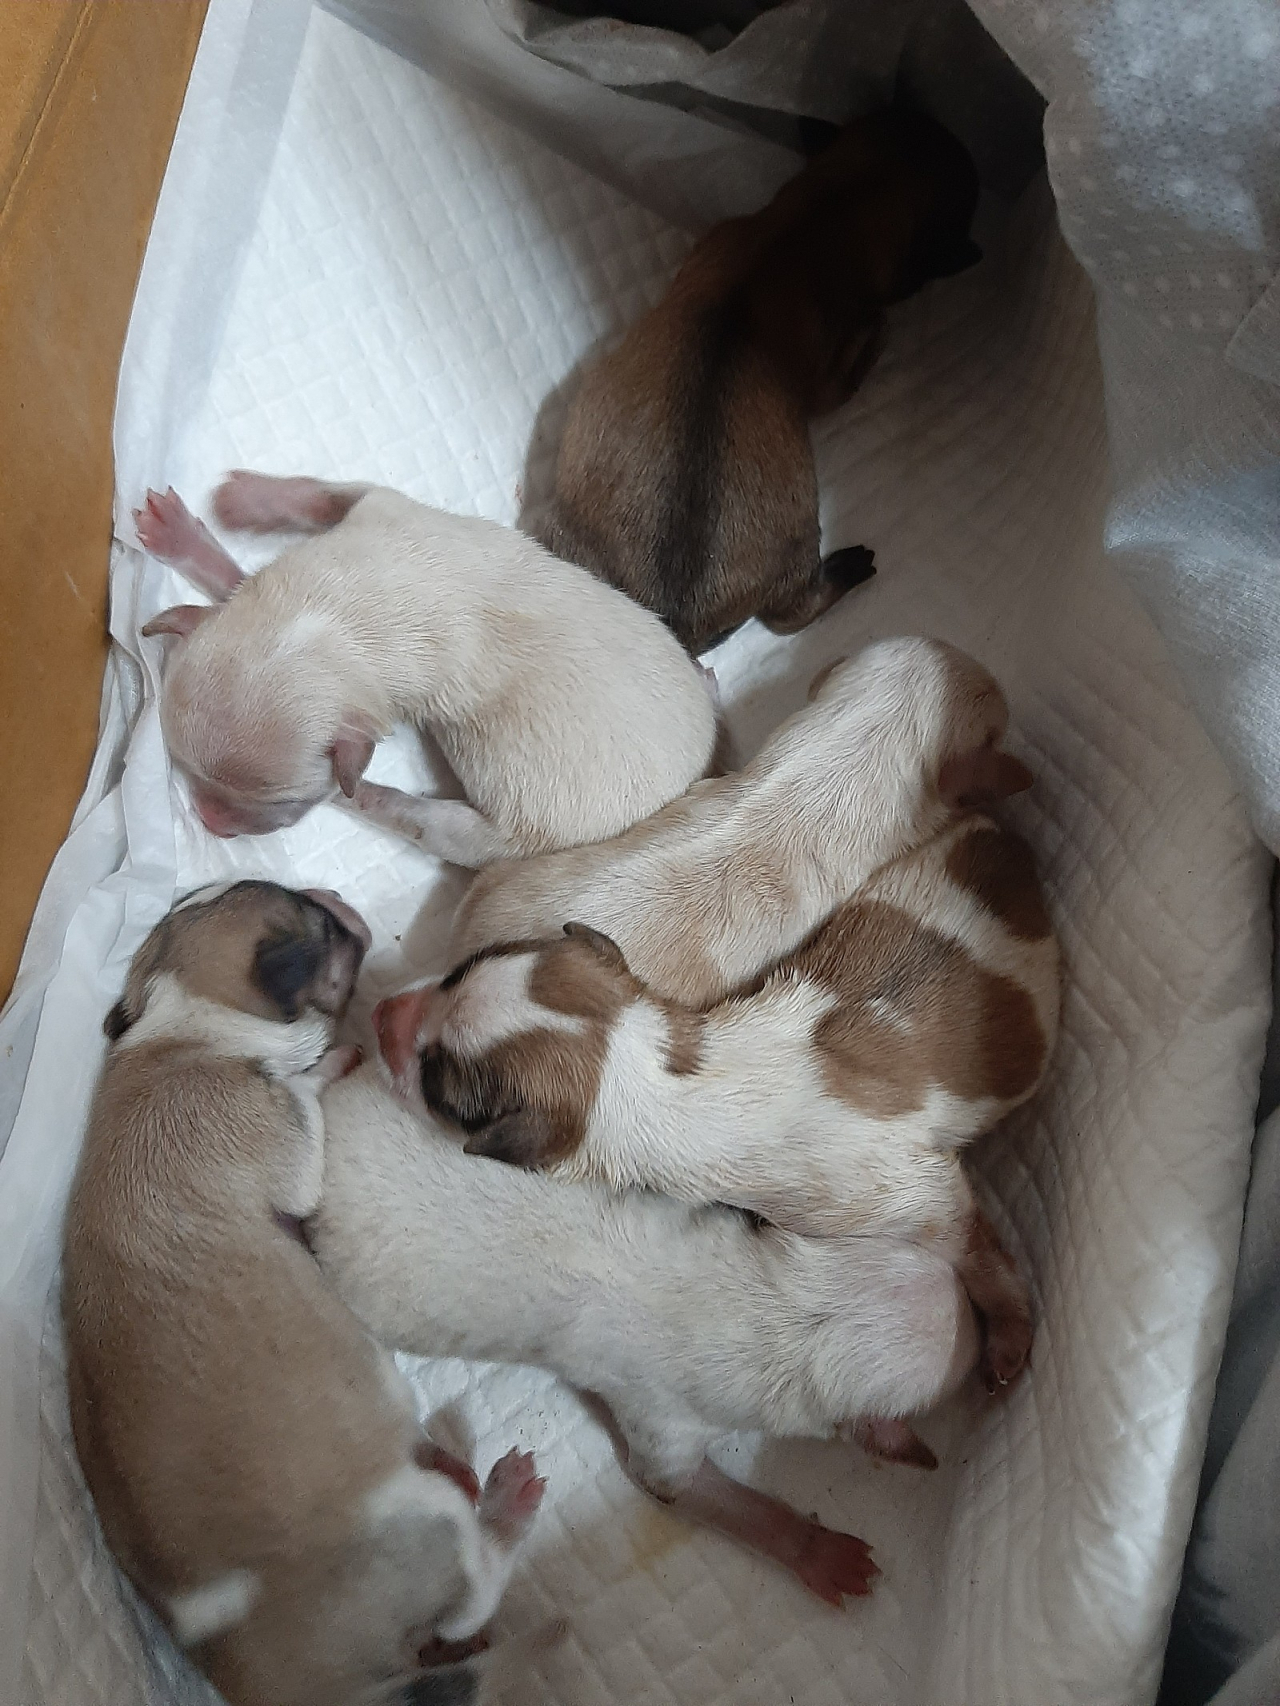 Six puppies that were thrown away in a garbage bag (Taean Animal Protection Society)